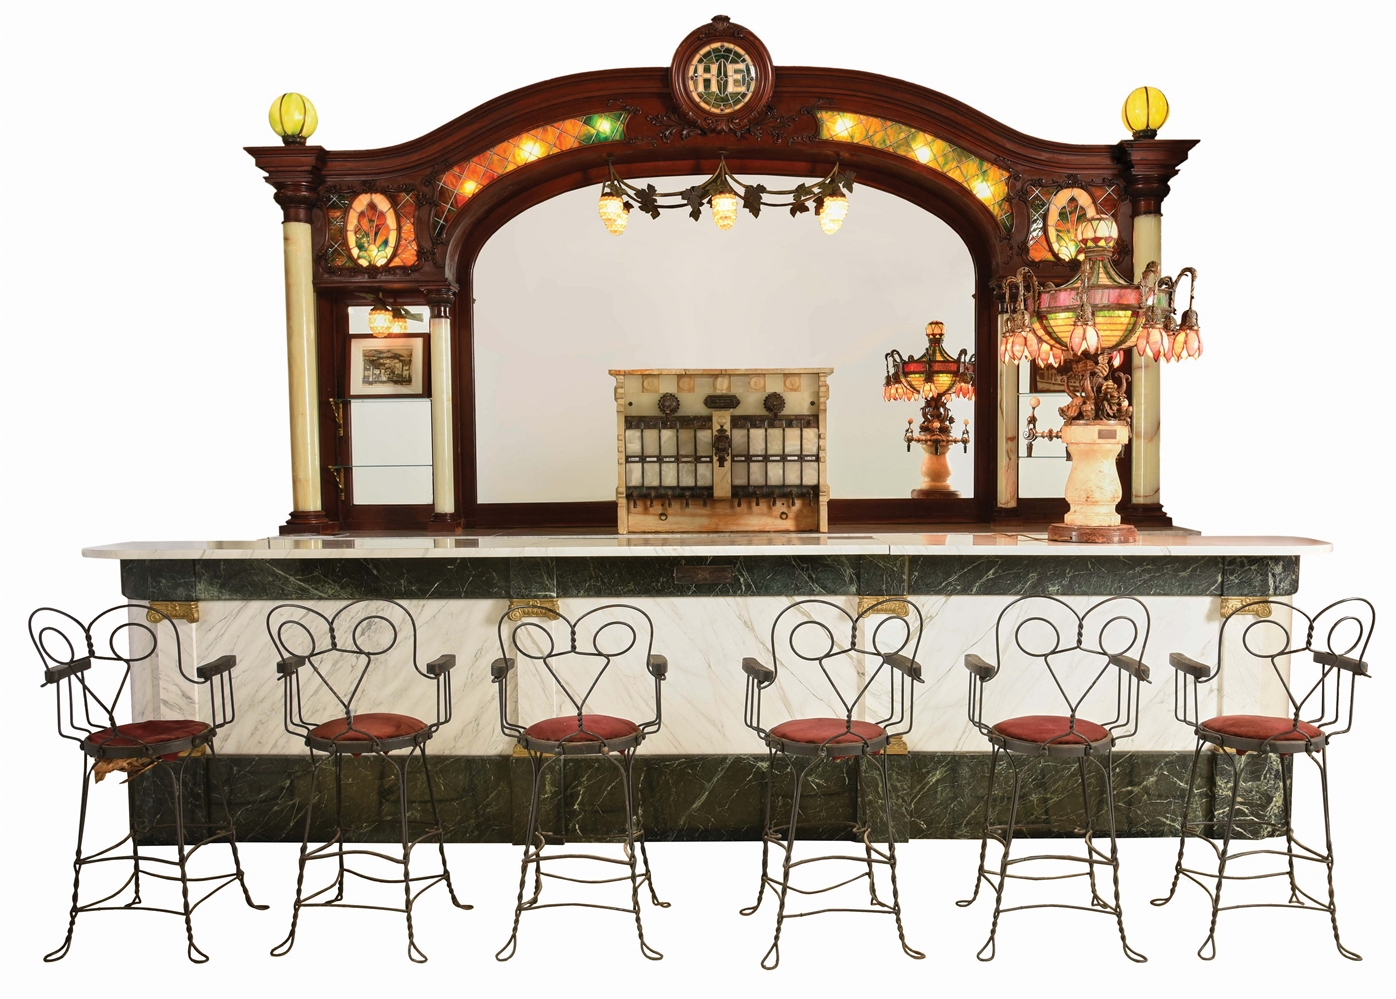 AMAZING 19TH CENTURY SODA FOUNTAIN FRONT AND BACKBAR WITH FOUNTAIN